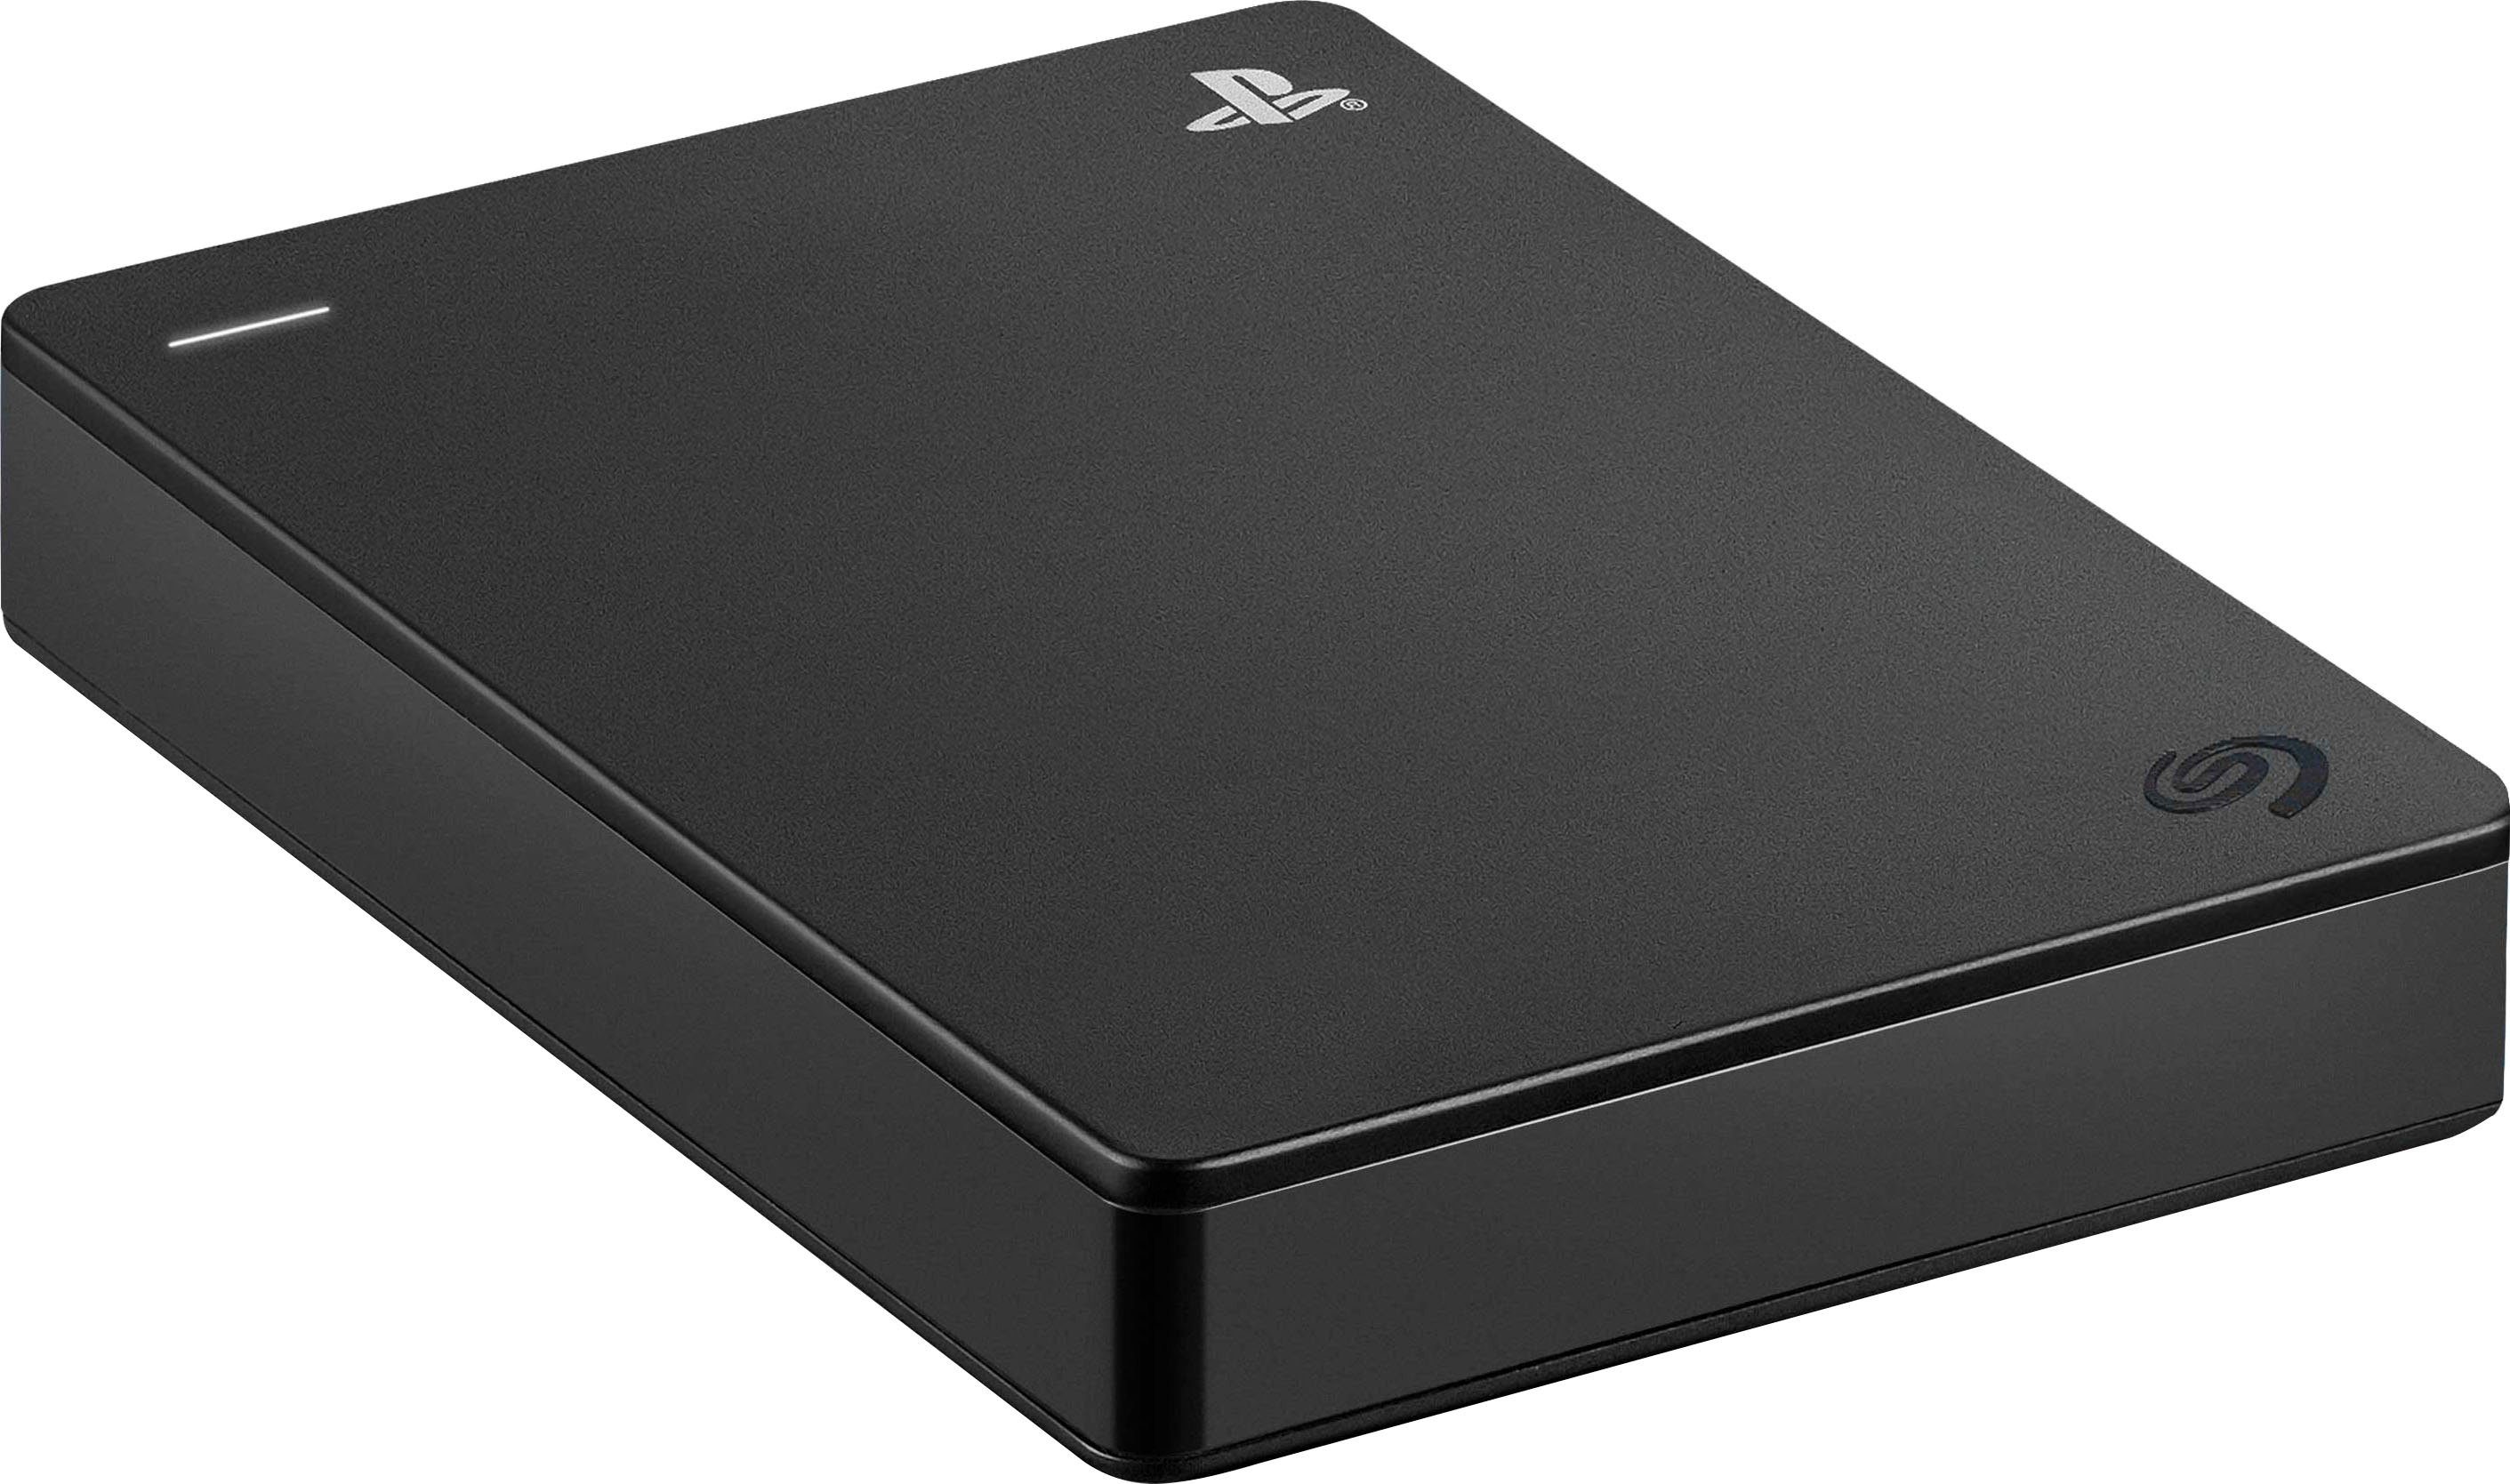 Seagate Game Drive für PS4/PS5 Gbps MB/S TB) 3.0) 5.0 2.0) (USB (4 externe HDD-Festplatte (USB 480 Lesegeschwindigkeit Mbps 4TB 